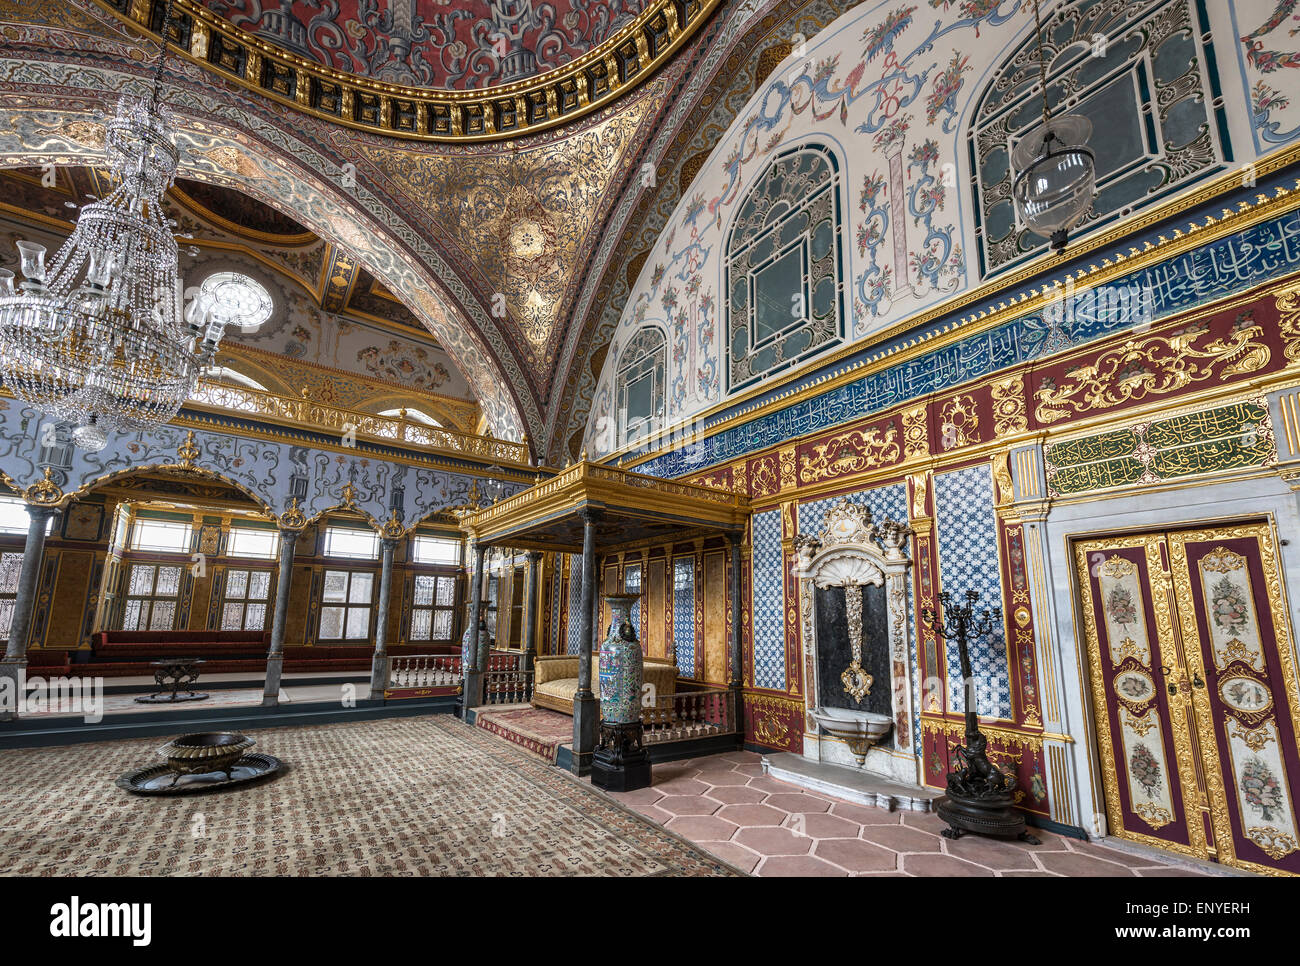 Imperial Throne Room in the Harem of Topkapi Palace. Seraglio Point, Sultanahmet, Istanbul Stock Photo